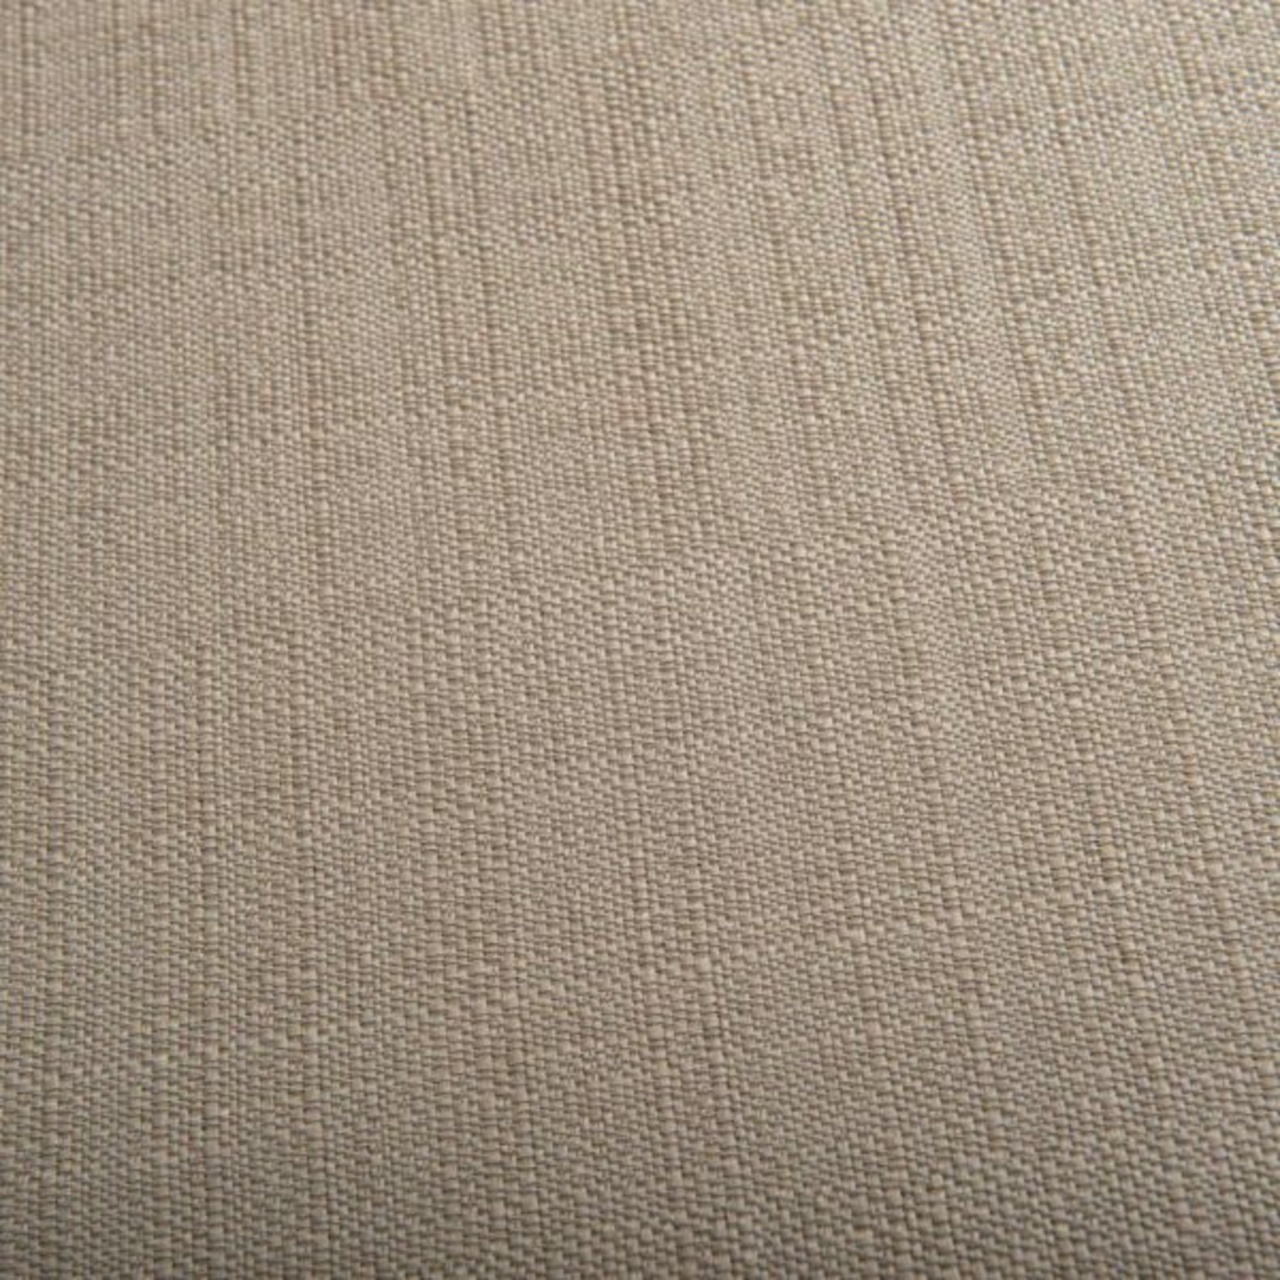 Table Linen Yucca 52 Percent Polyester 48 Percent Cotton 245 Grs M2 Professional Restaurant Linvosges Hotellerie